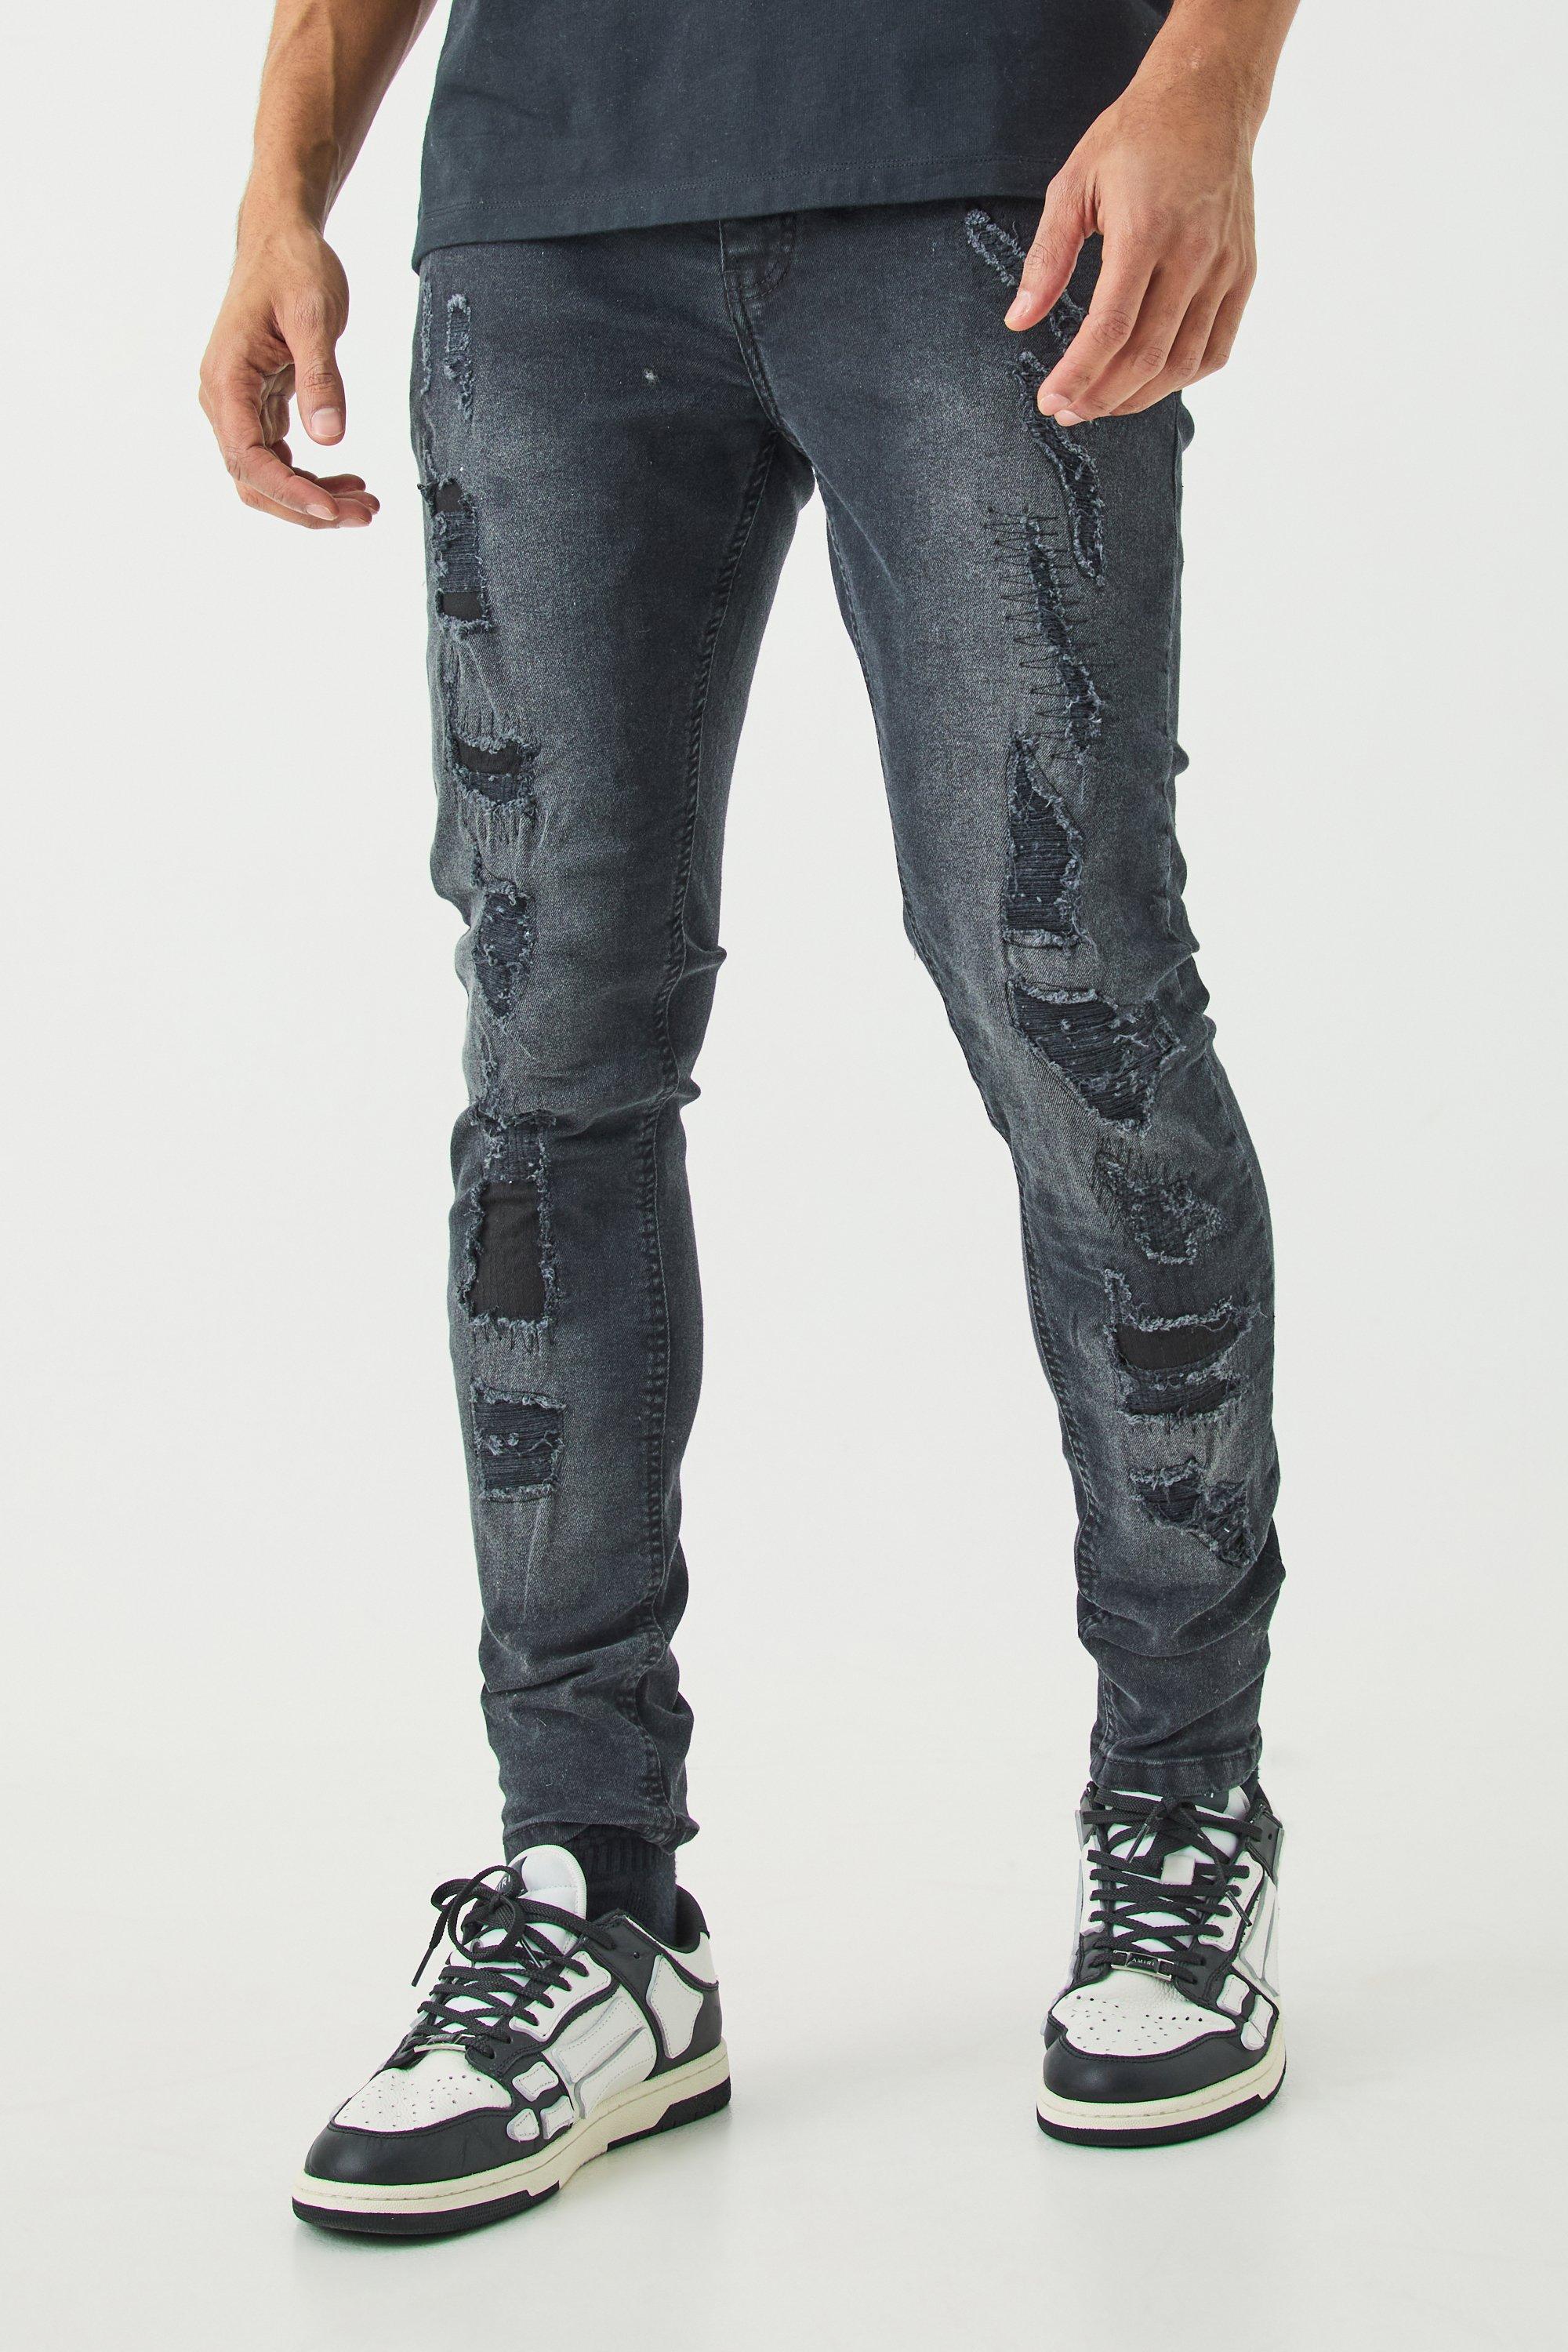 Mens Skinny Stretch All Over Ripped Black Jeans, Black